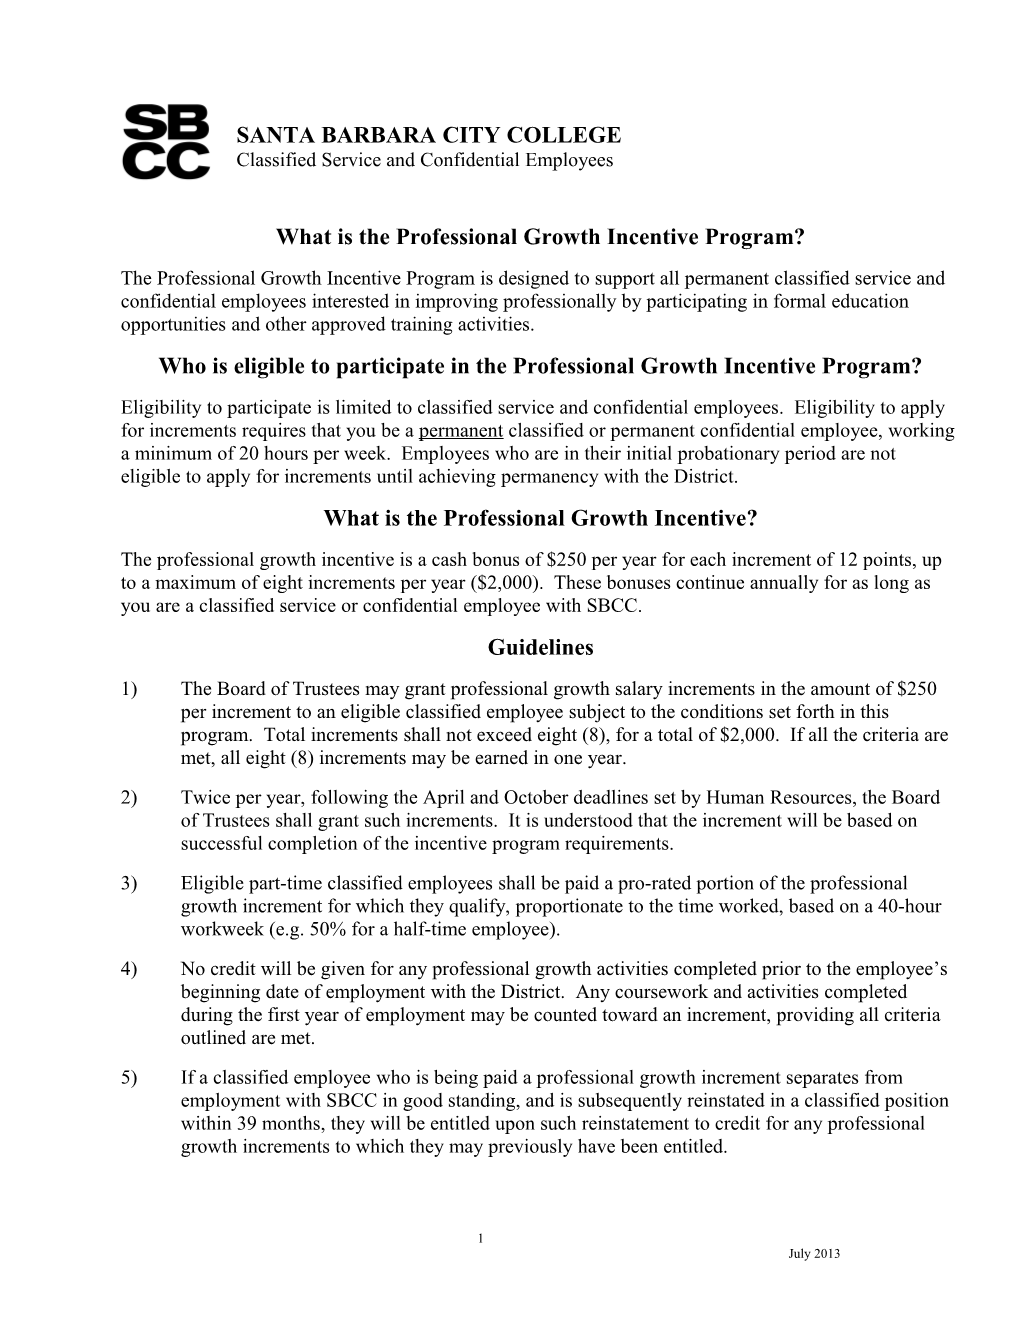 What Is the Professional Growth Incentive Program?